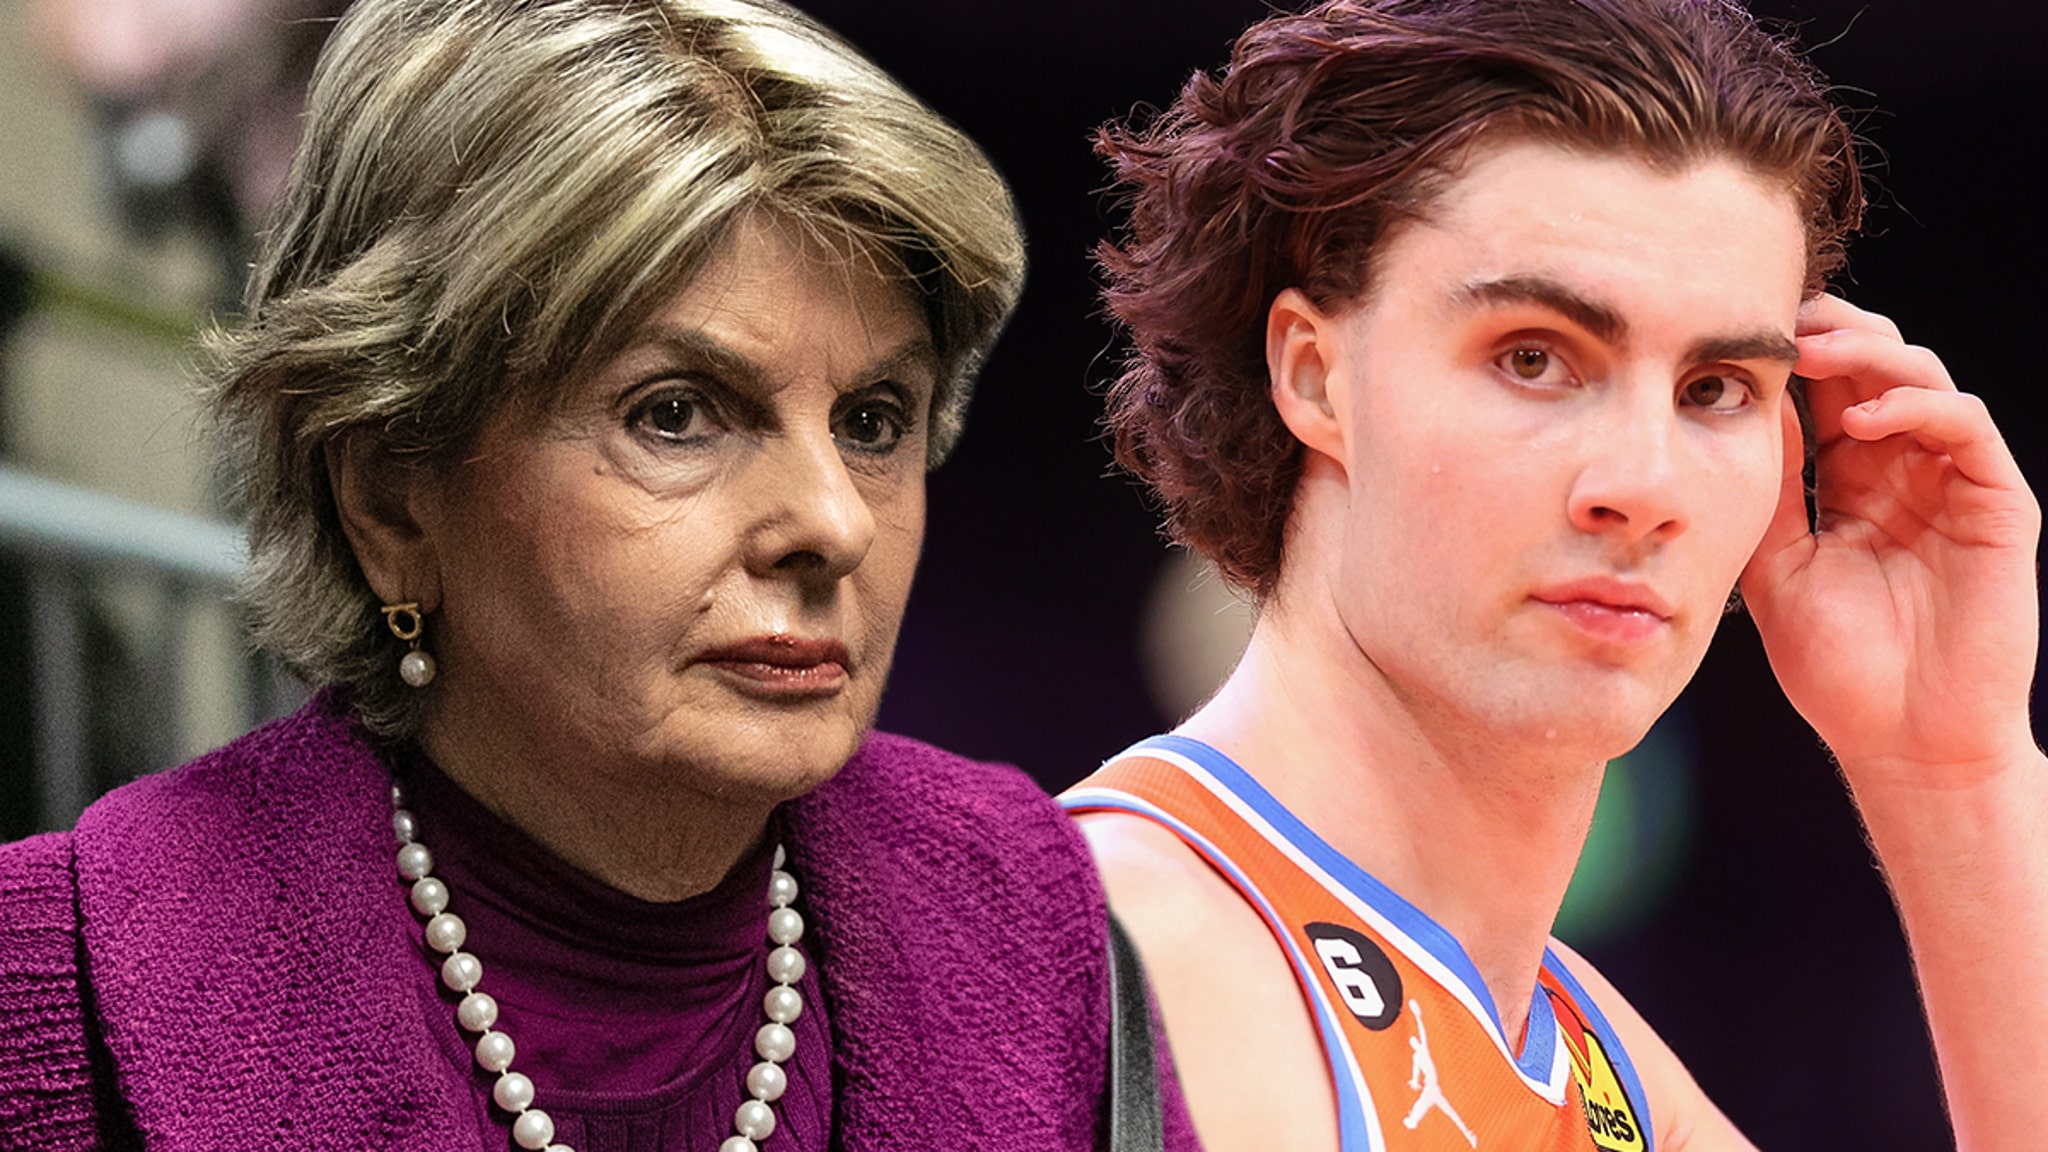 Famed Attorney Gloria Allred Hired By Minor’s Family At Center Of Josh Giddey Investigation